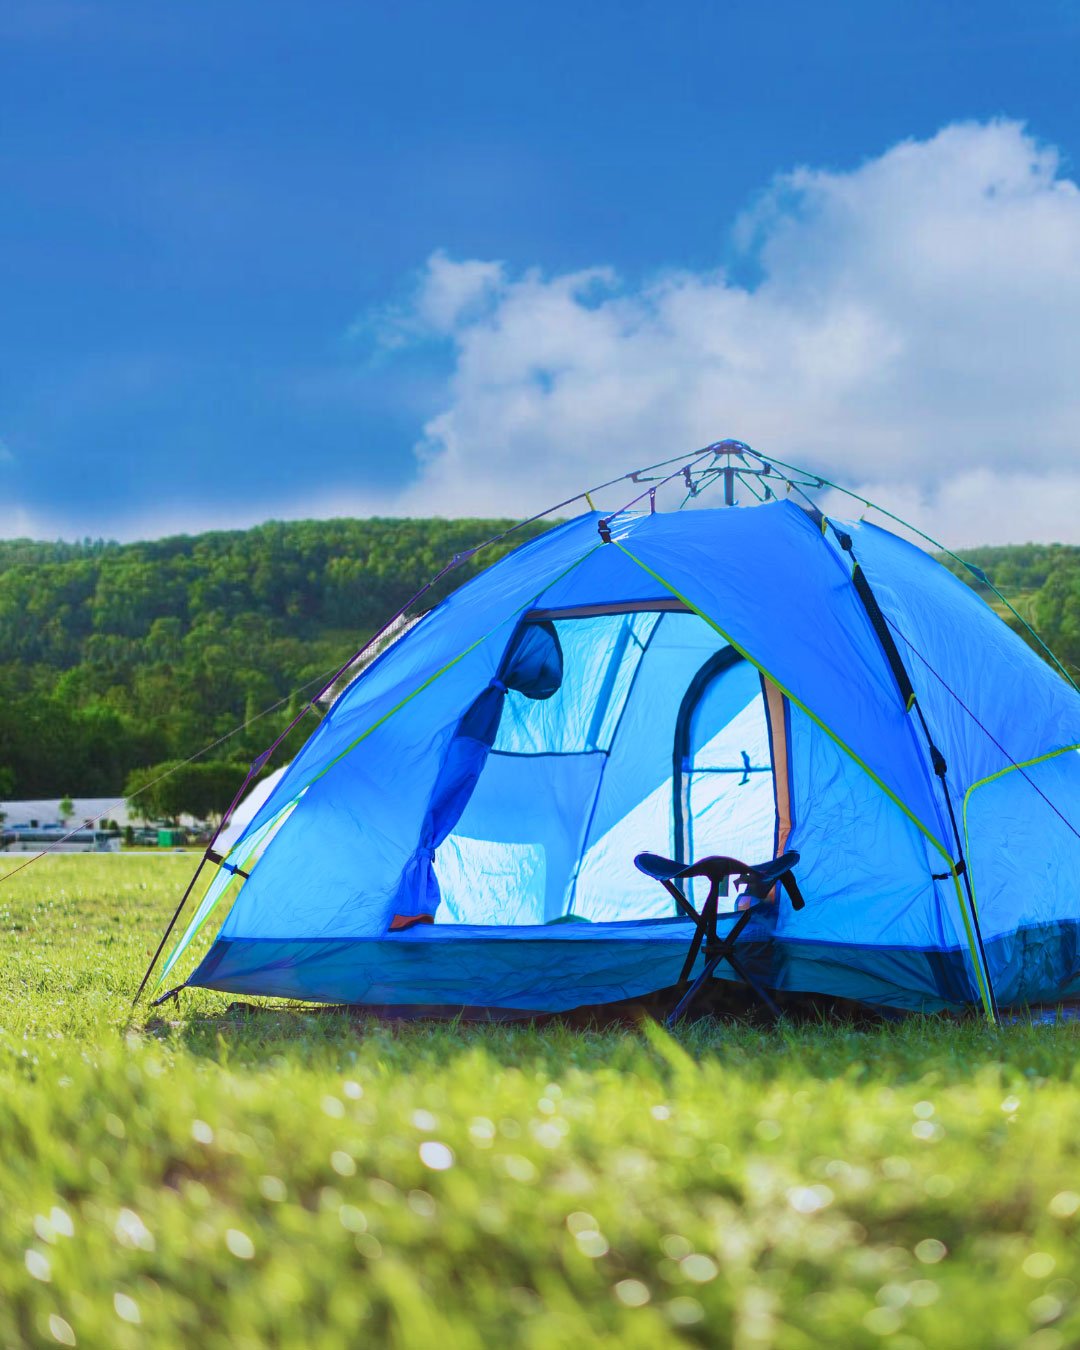 Blue tent in green field with blue sky